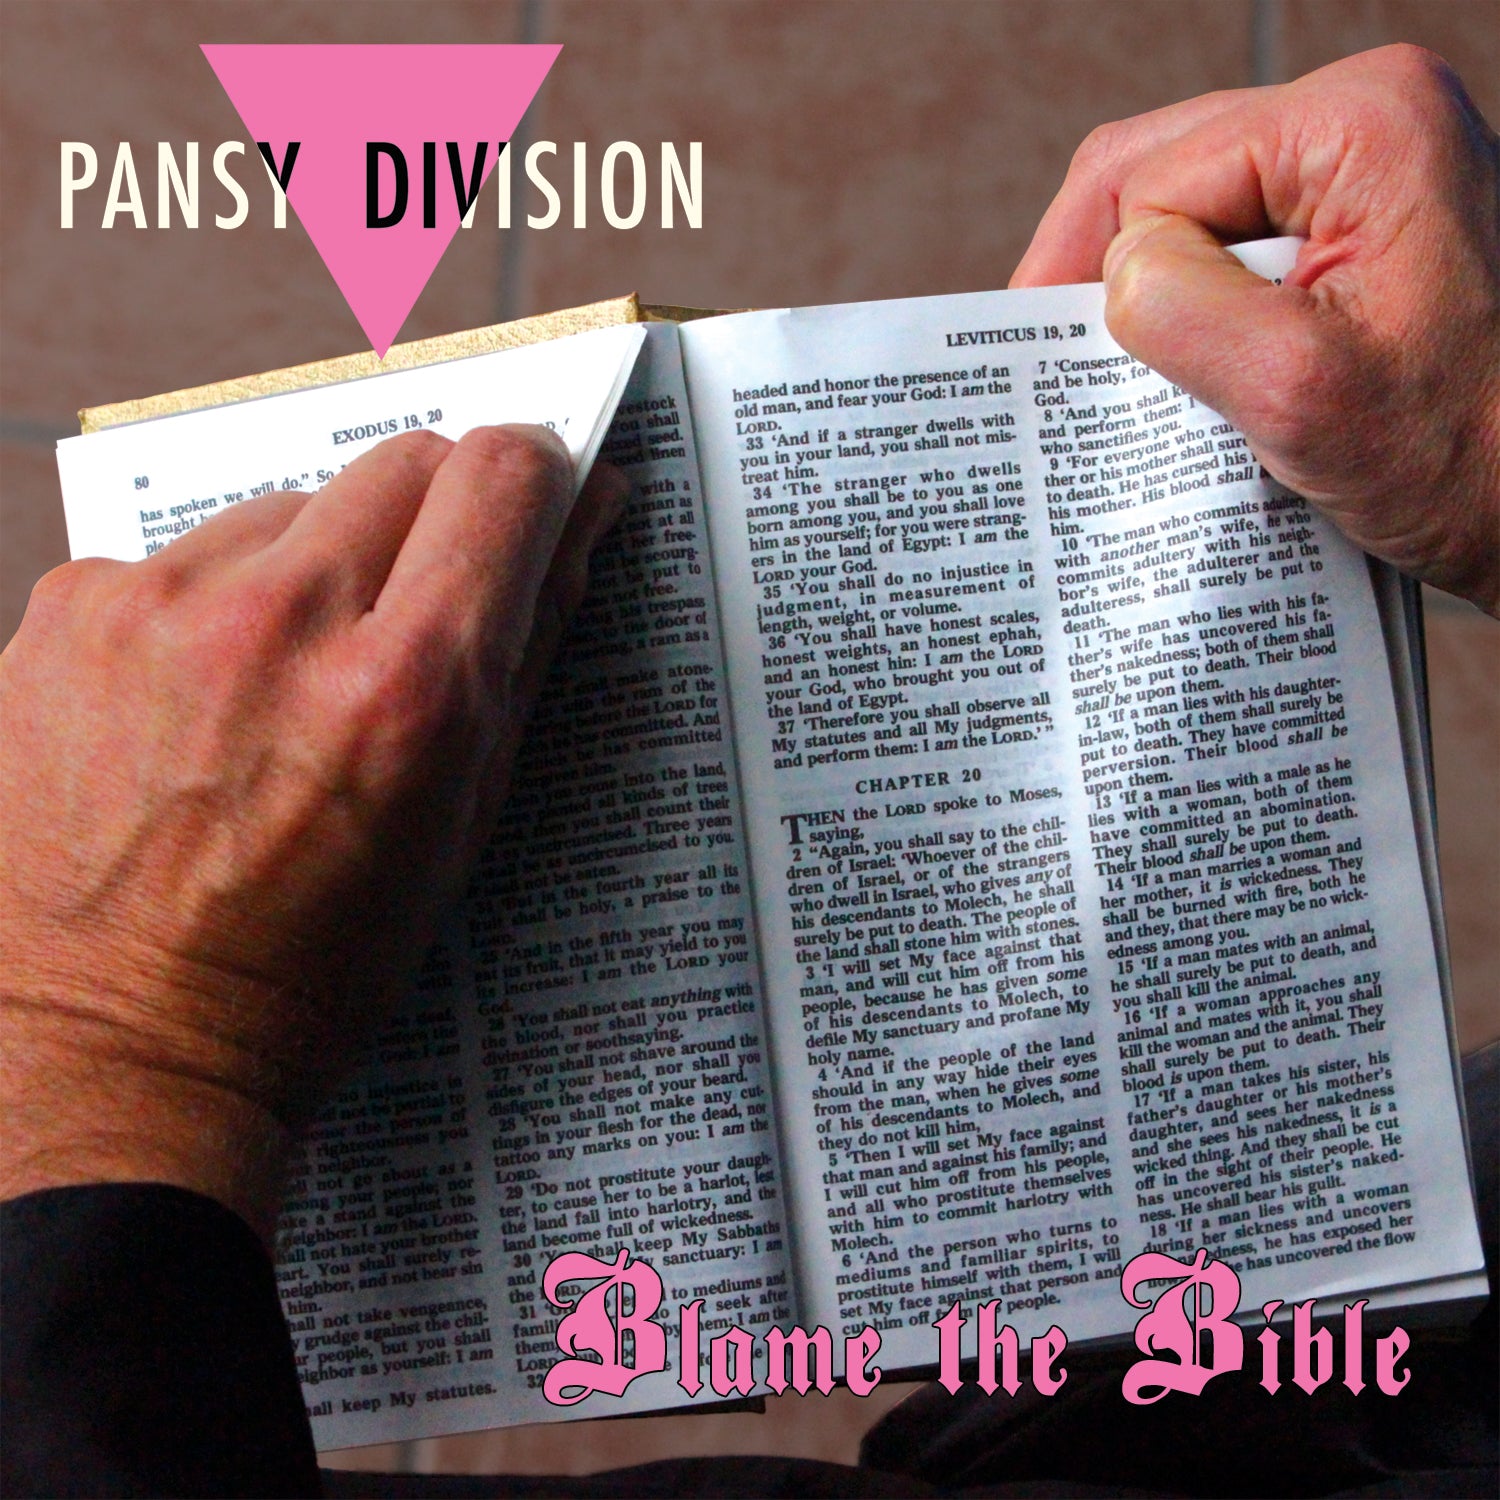 v484 - Pansy Division - "Blame The Bible"